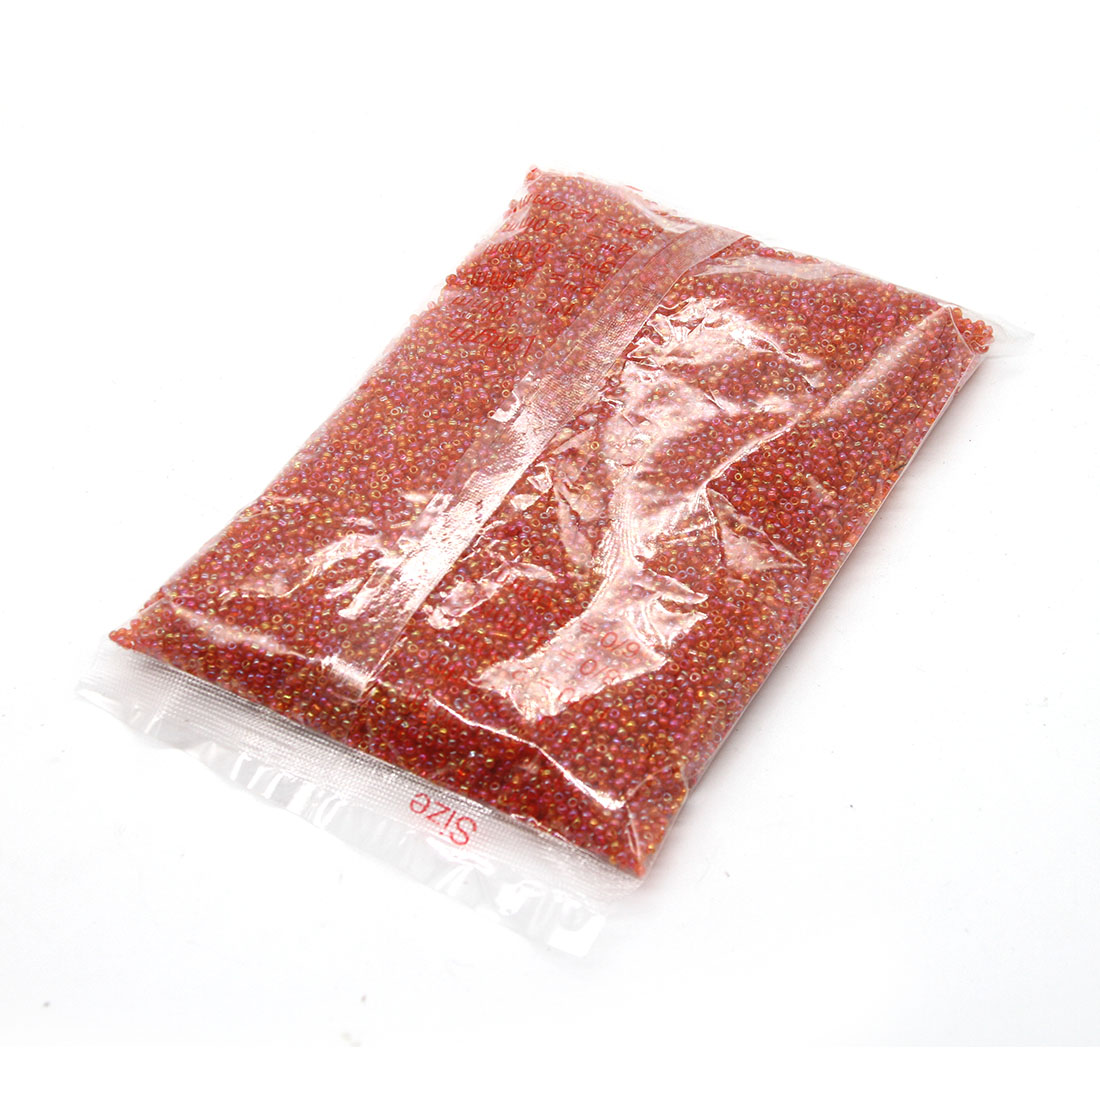 Red 2mm, 30,000 packs